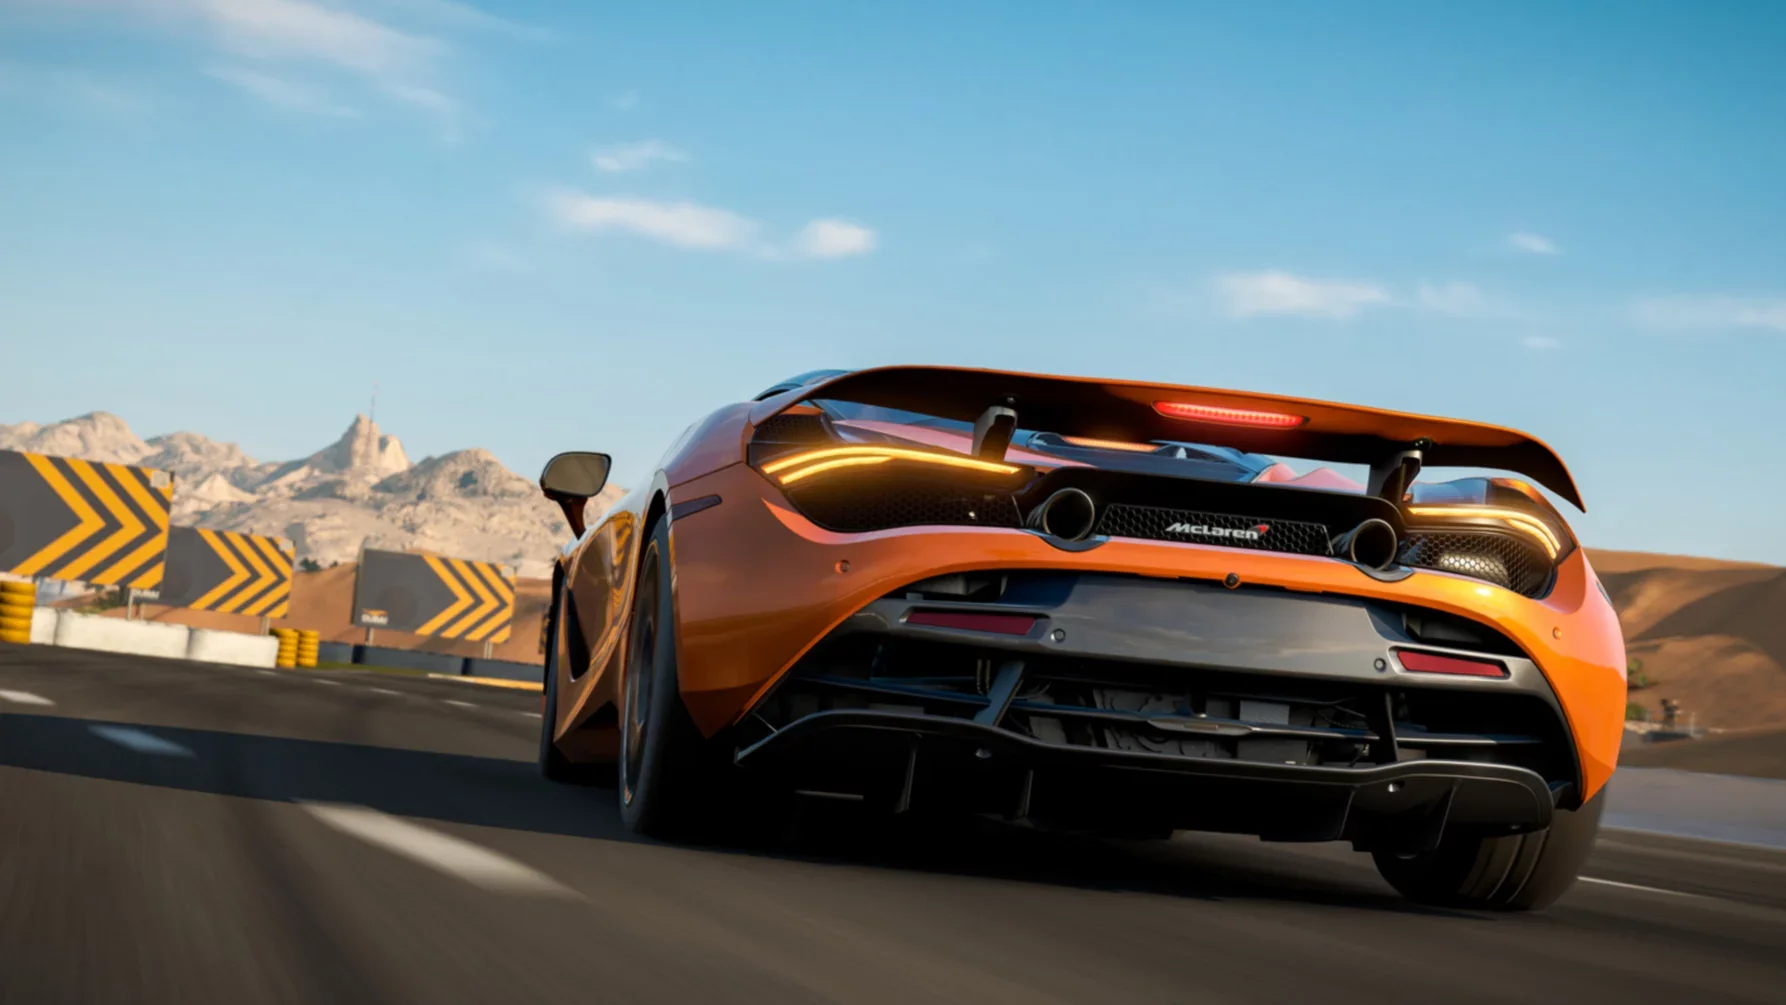 Players greeted the release of Forza Motorsport coolly